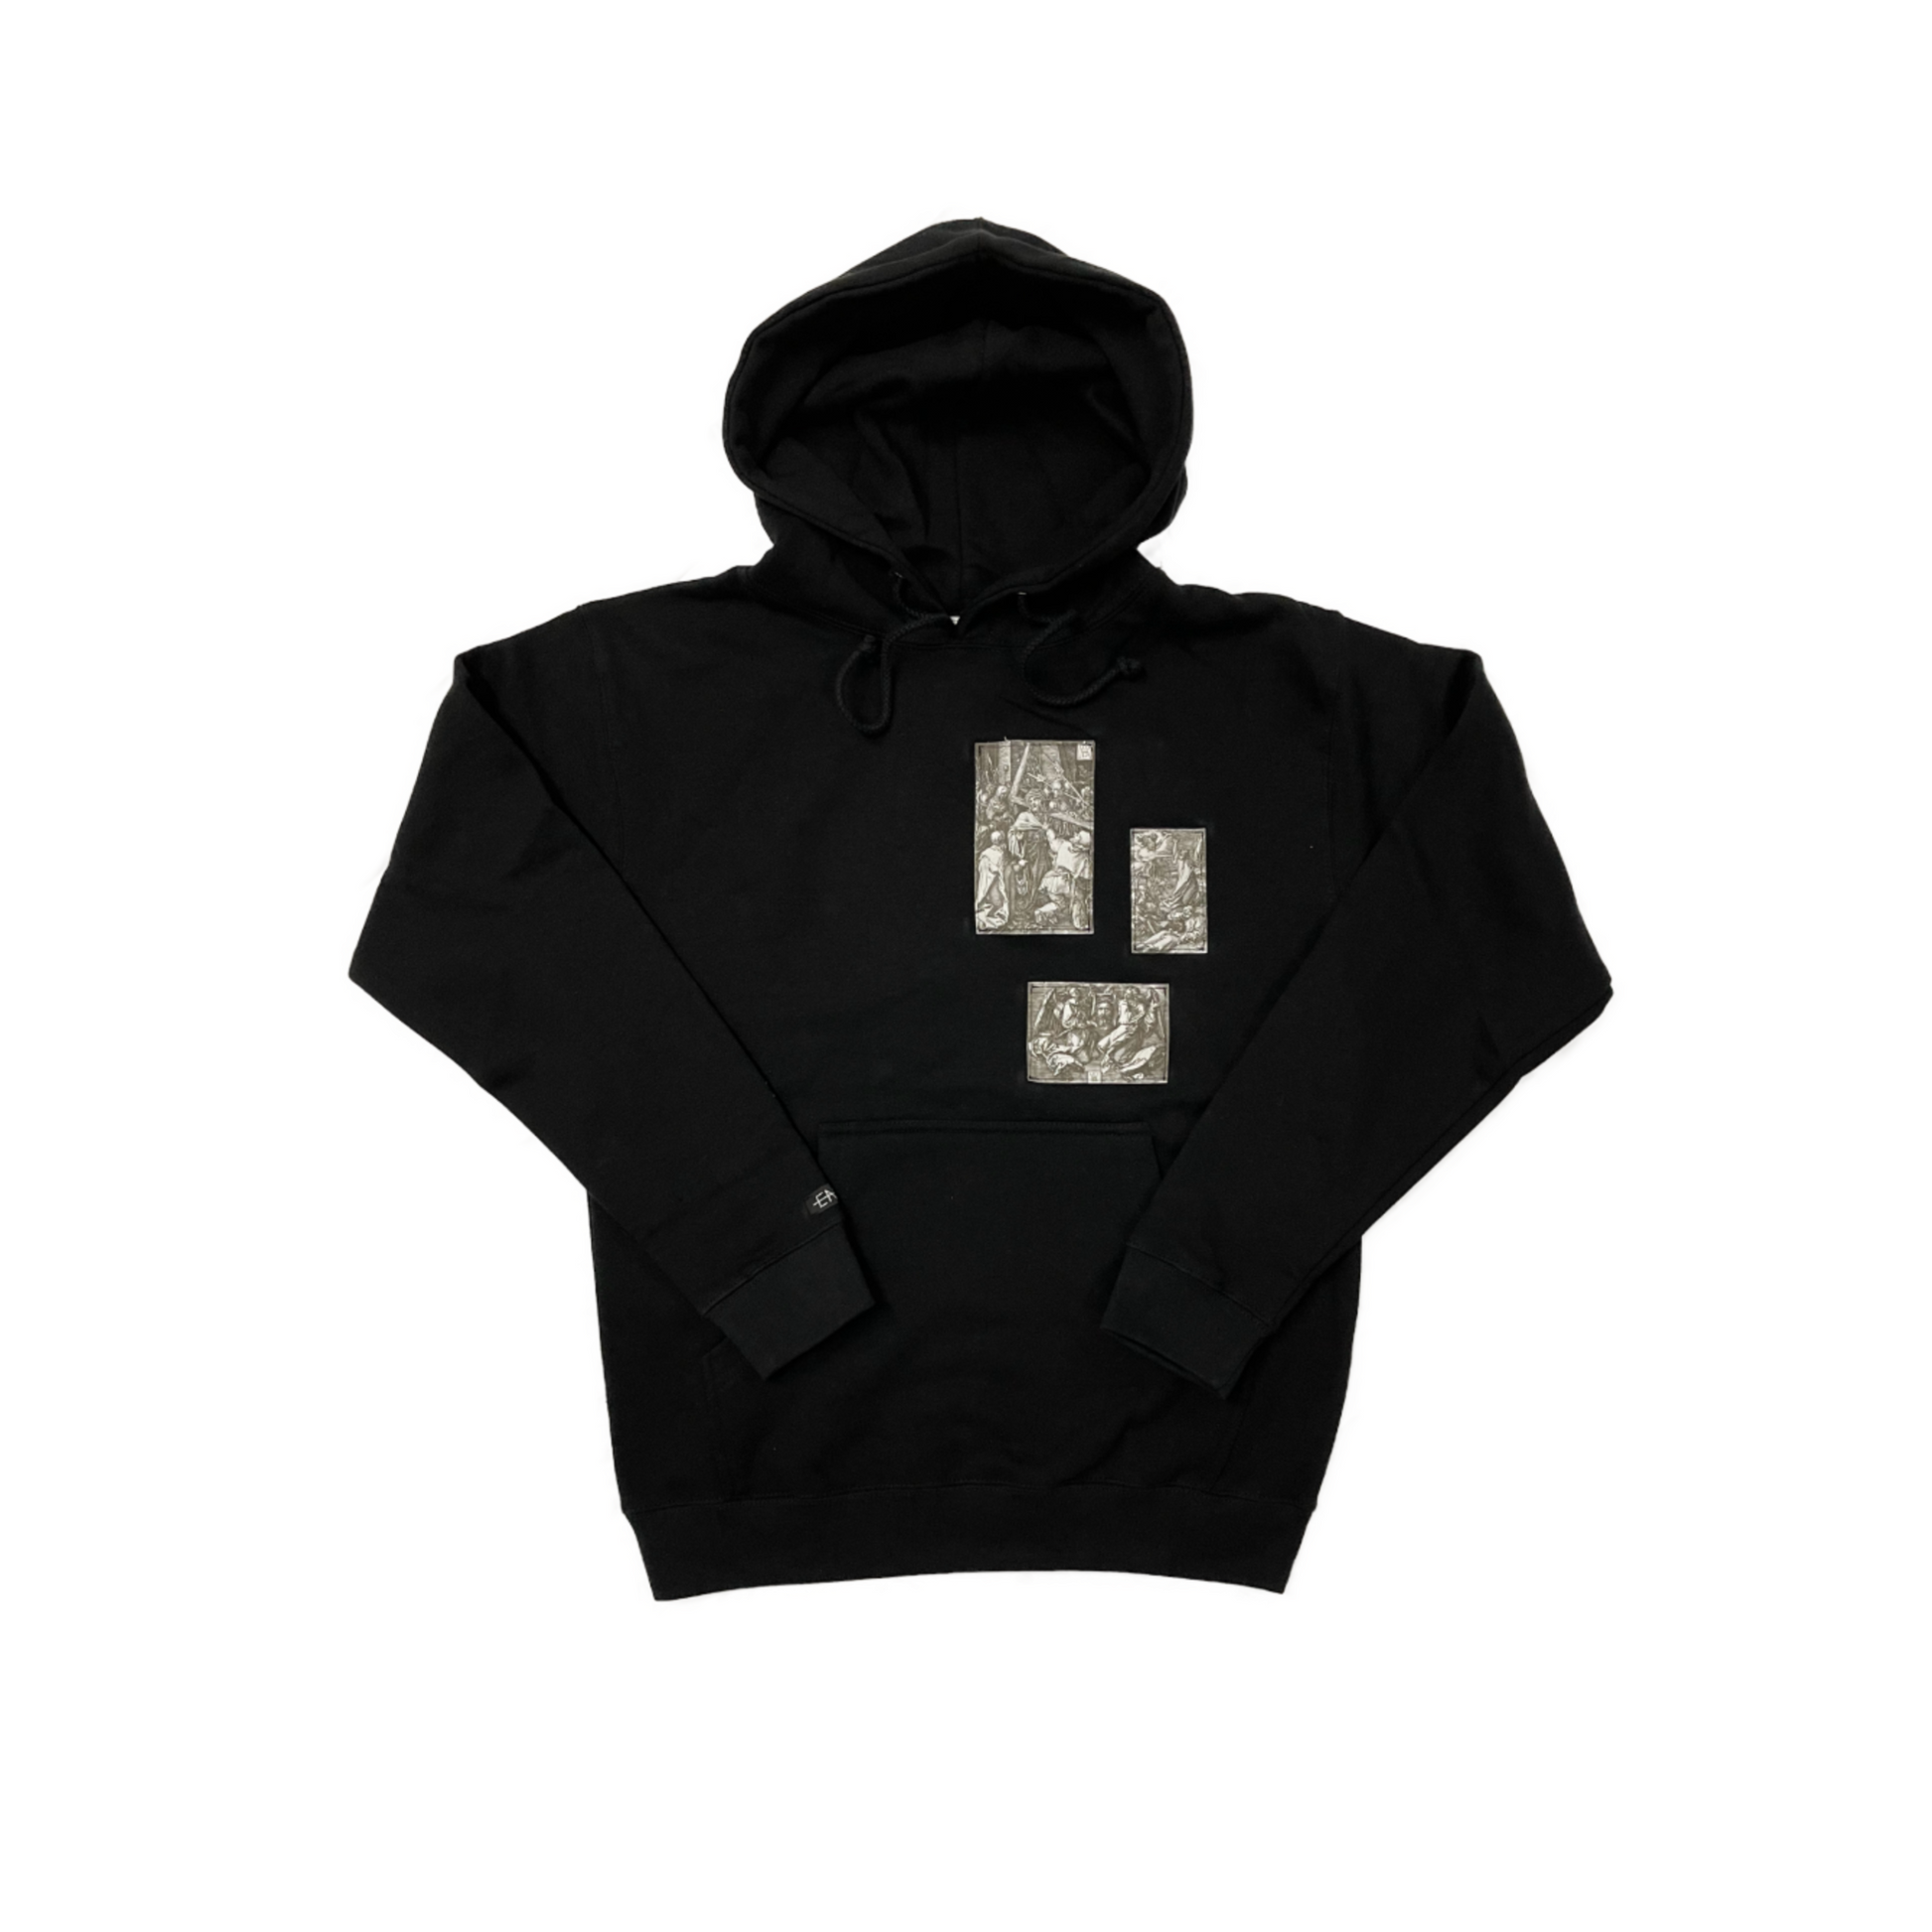 EnDz - Black Cotton Hoodie | Made Locally in Montreal